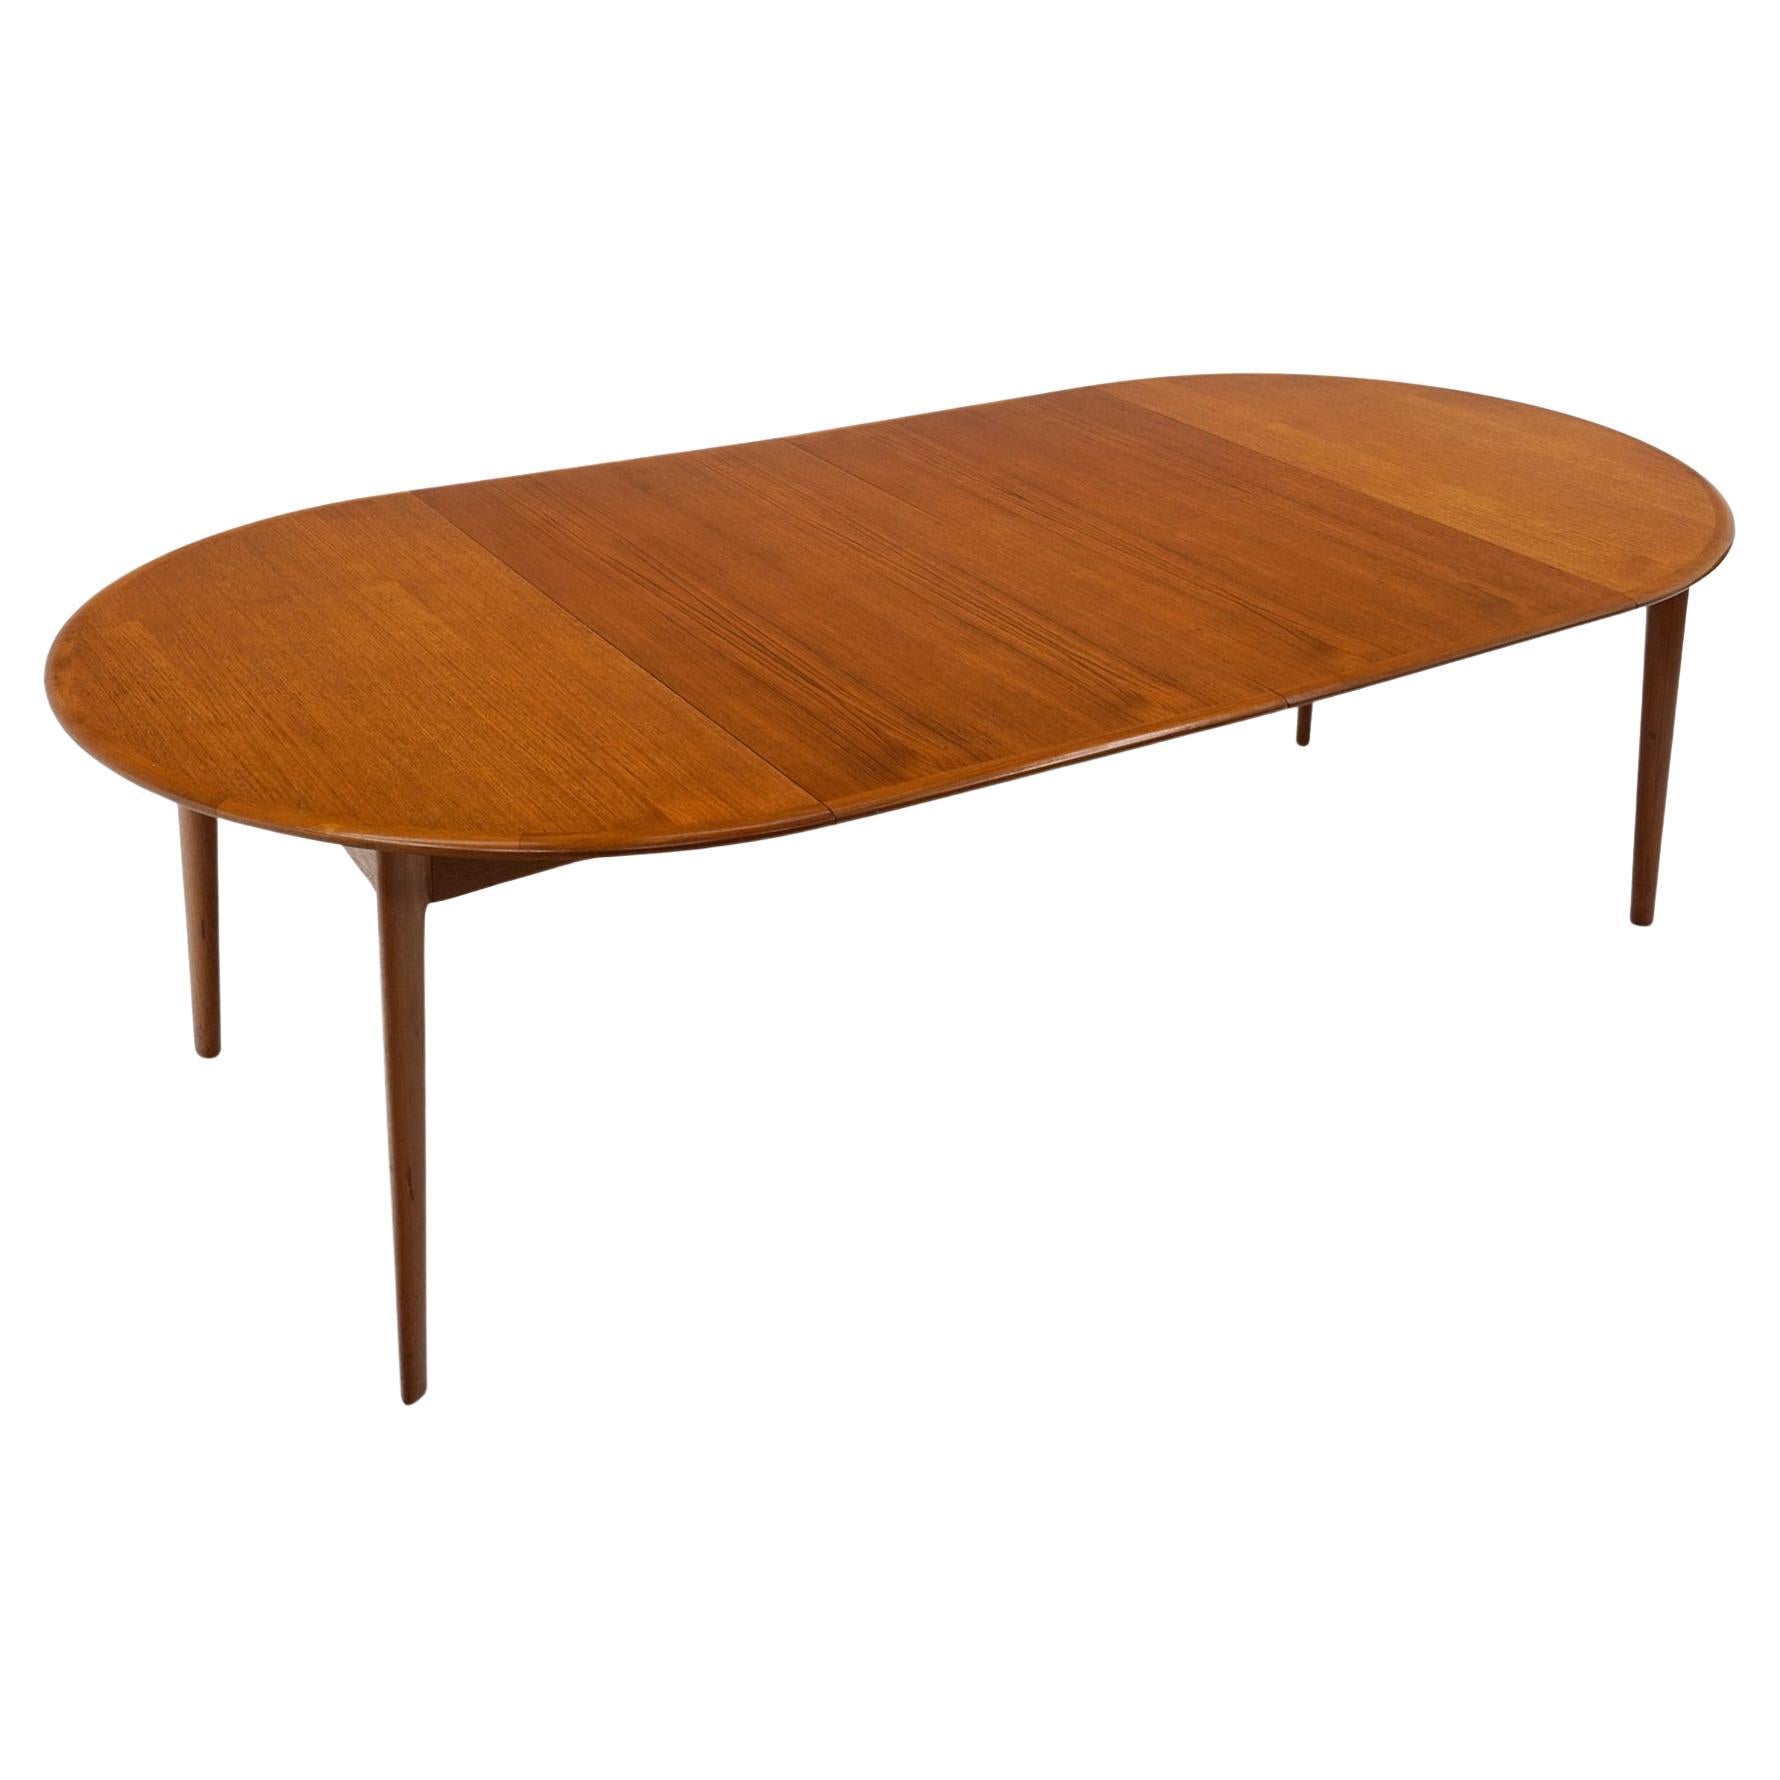 Round Expandable Danish Modern Teak Dining Table with Two Leaves, 1962, Original